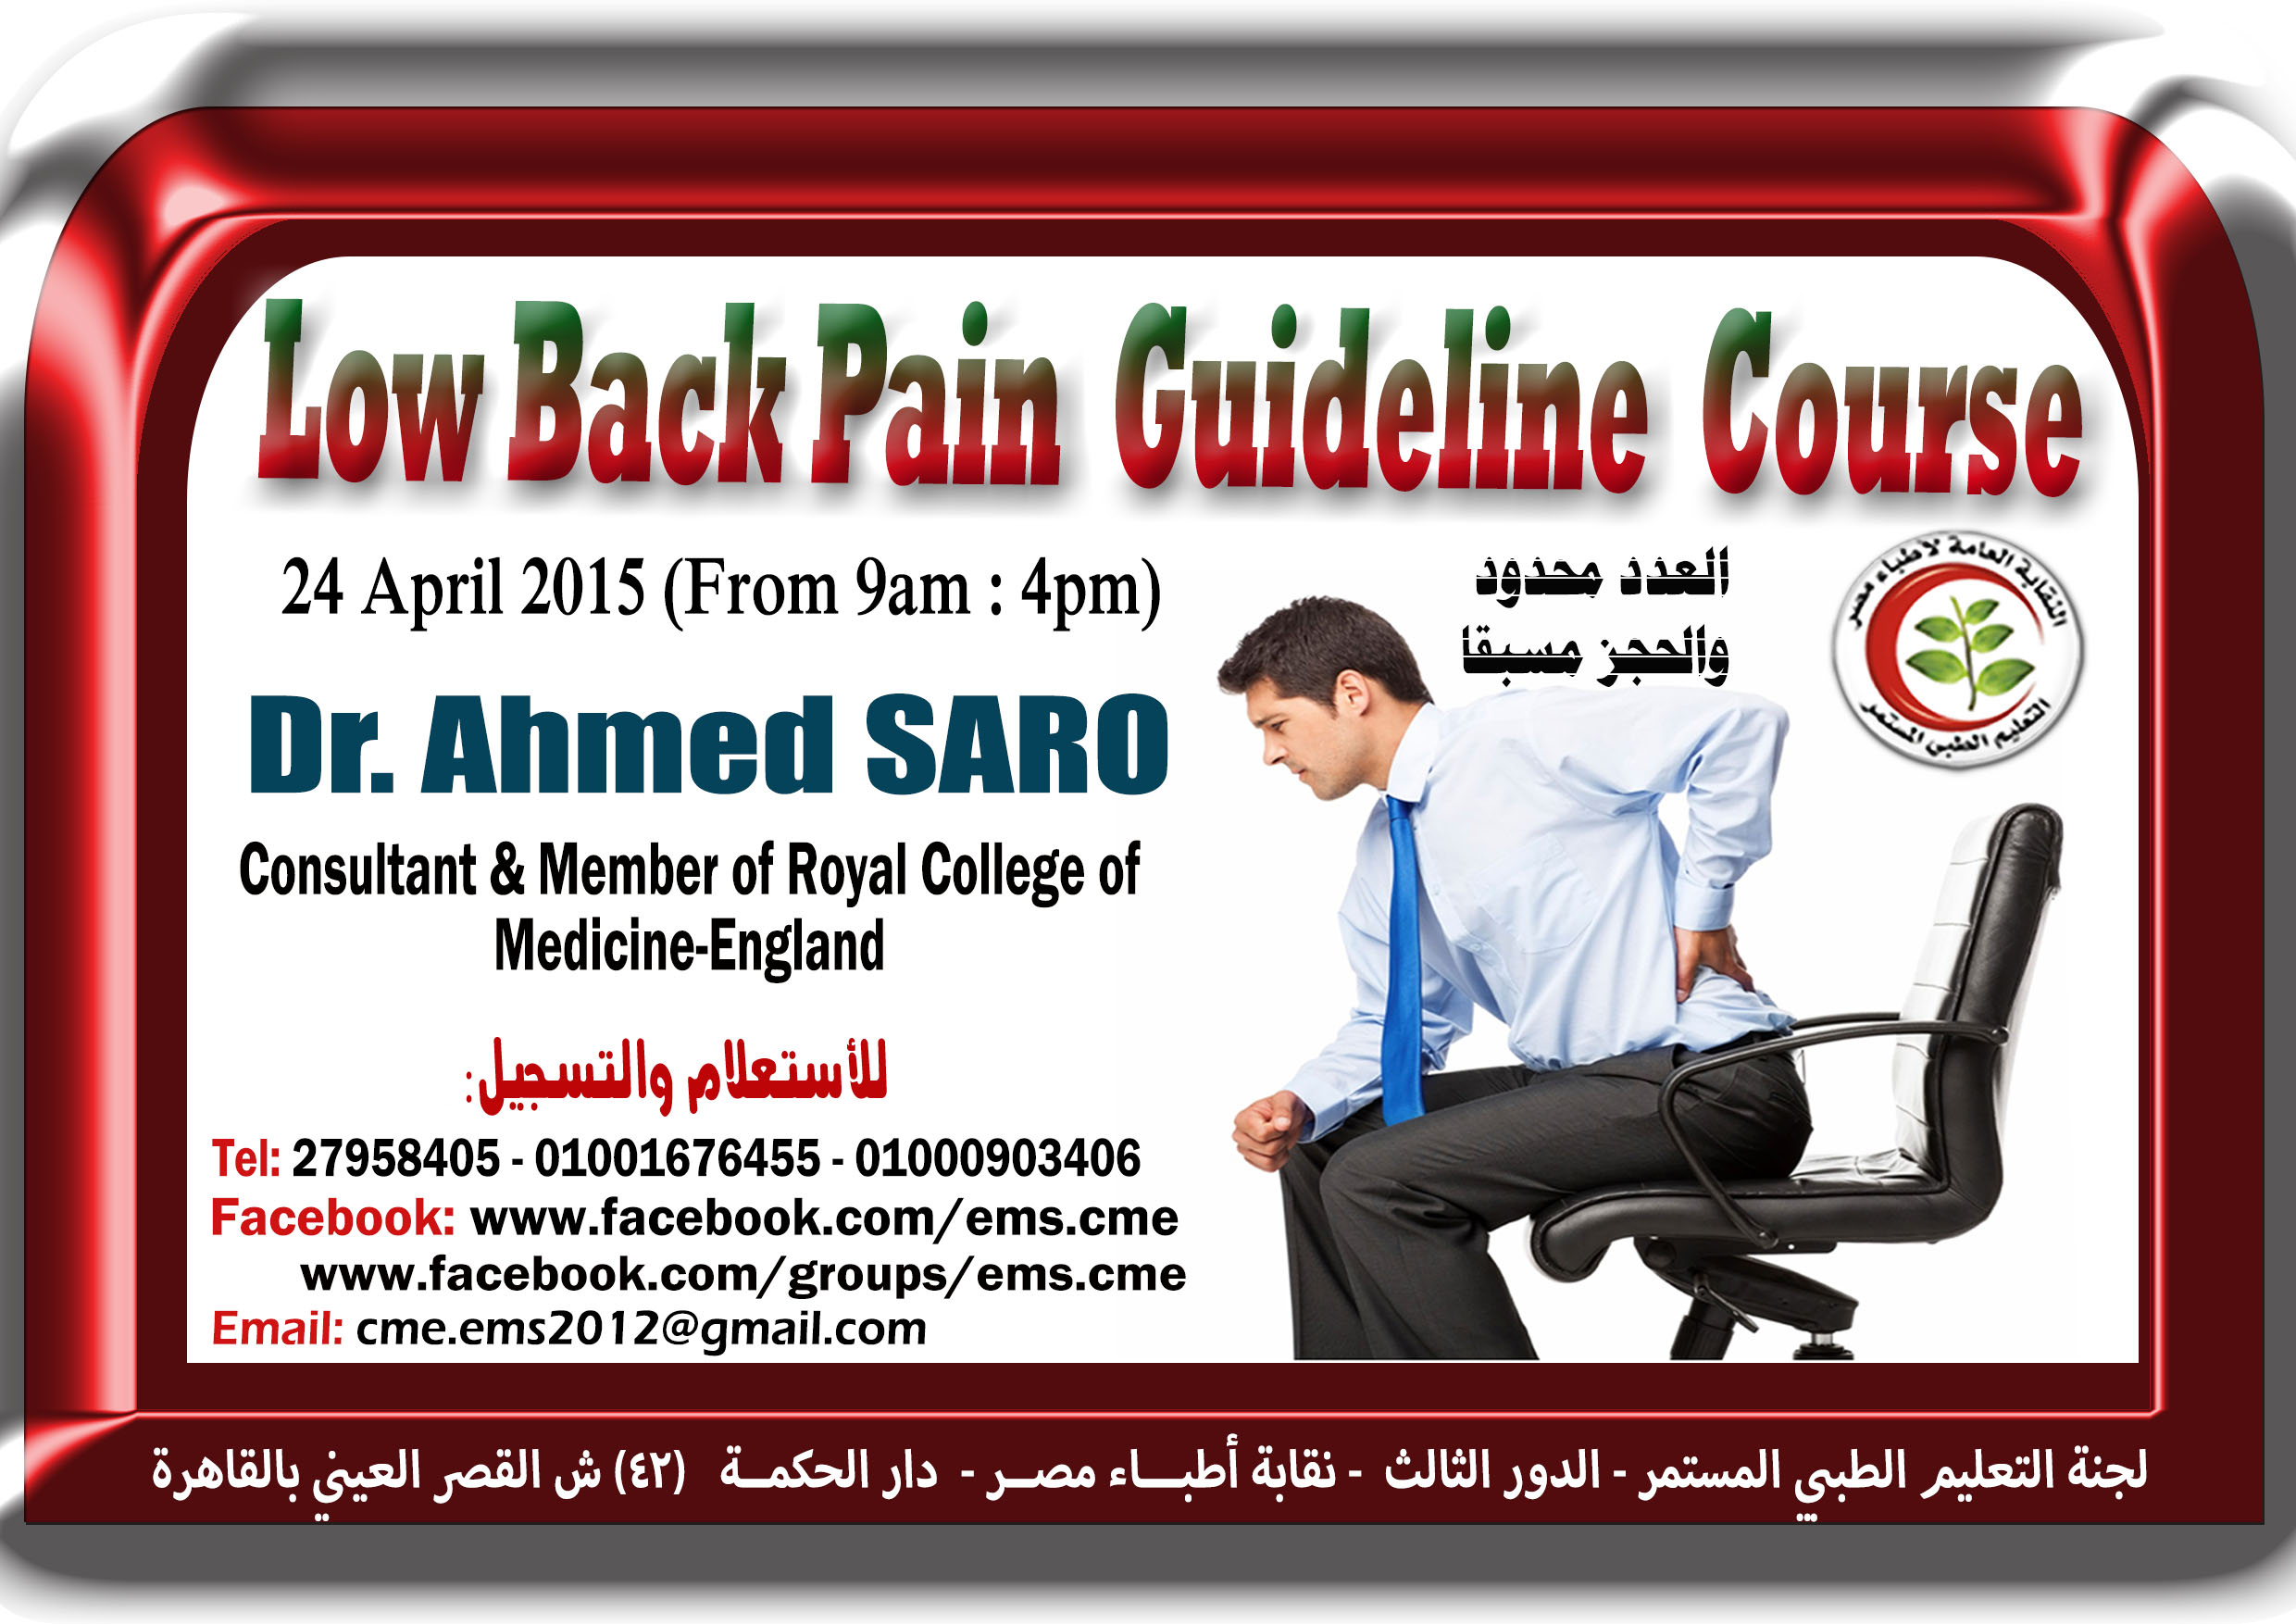 Low Back Pain Guideline Course